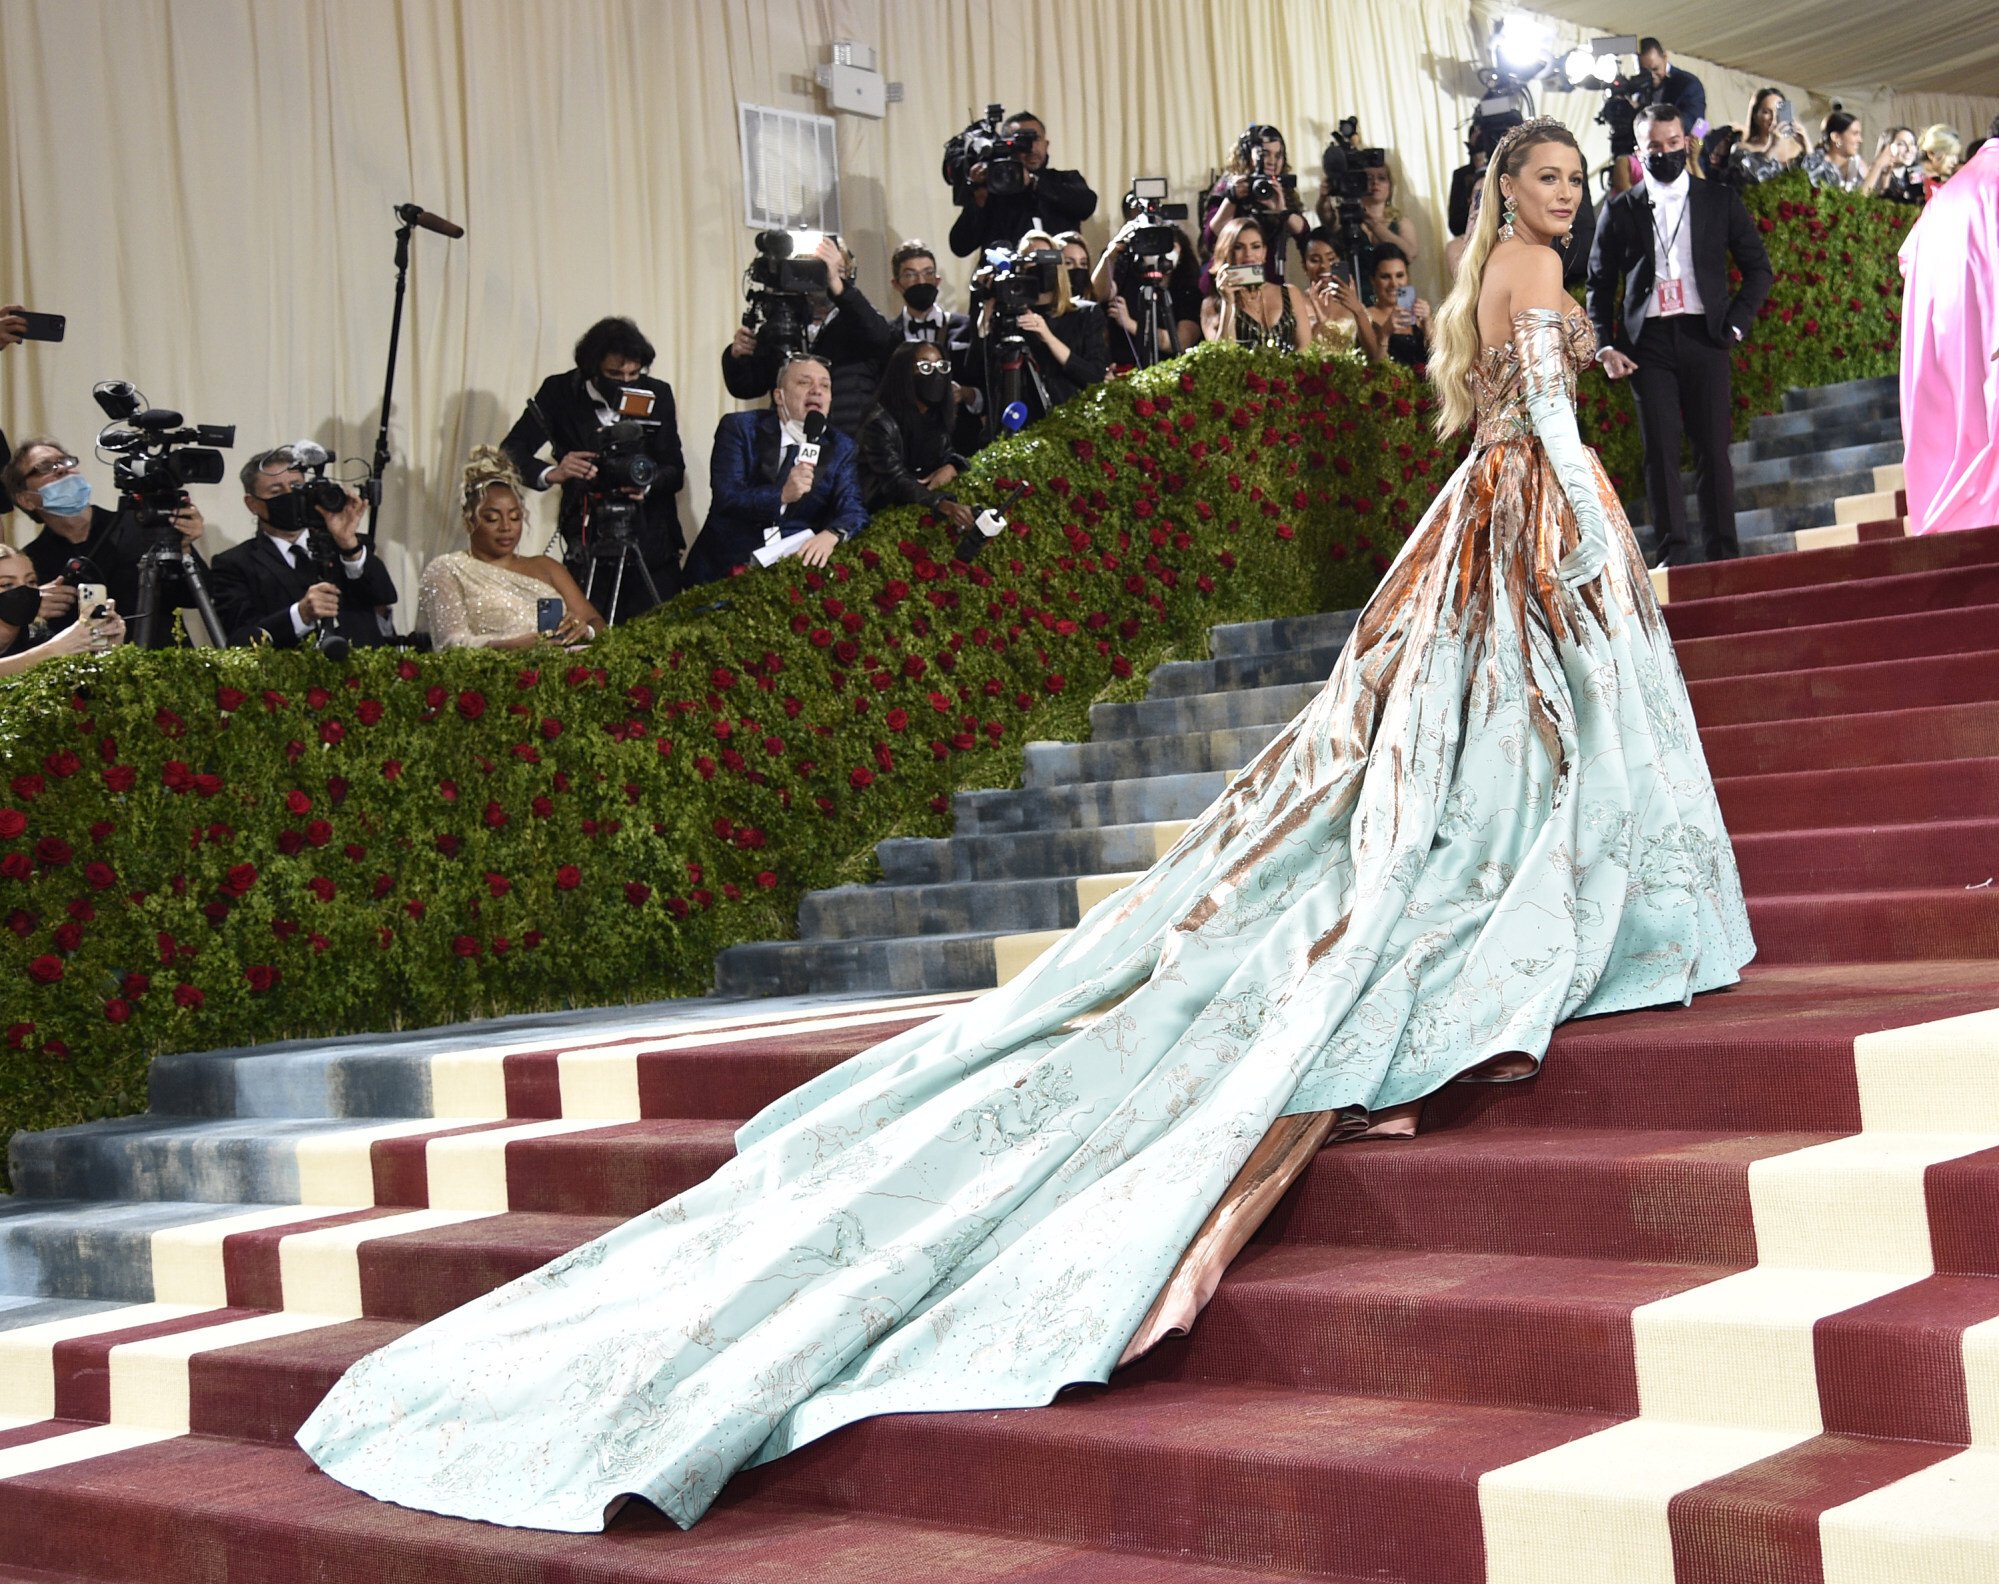 Blake Lively gave New York’s Statue of Liberty new meaning with her custom Atelier Versace ensemble for her appearance as co-host of The Metropolitan Museum of Art’s Costume Institute benefit gala on Monday. Photo: AP